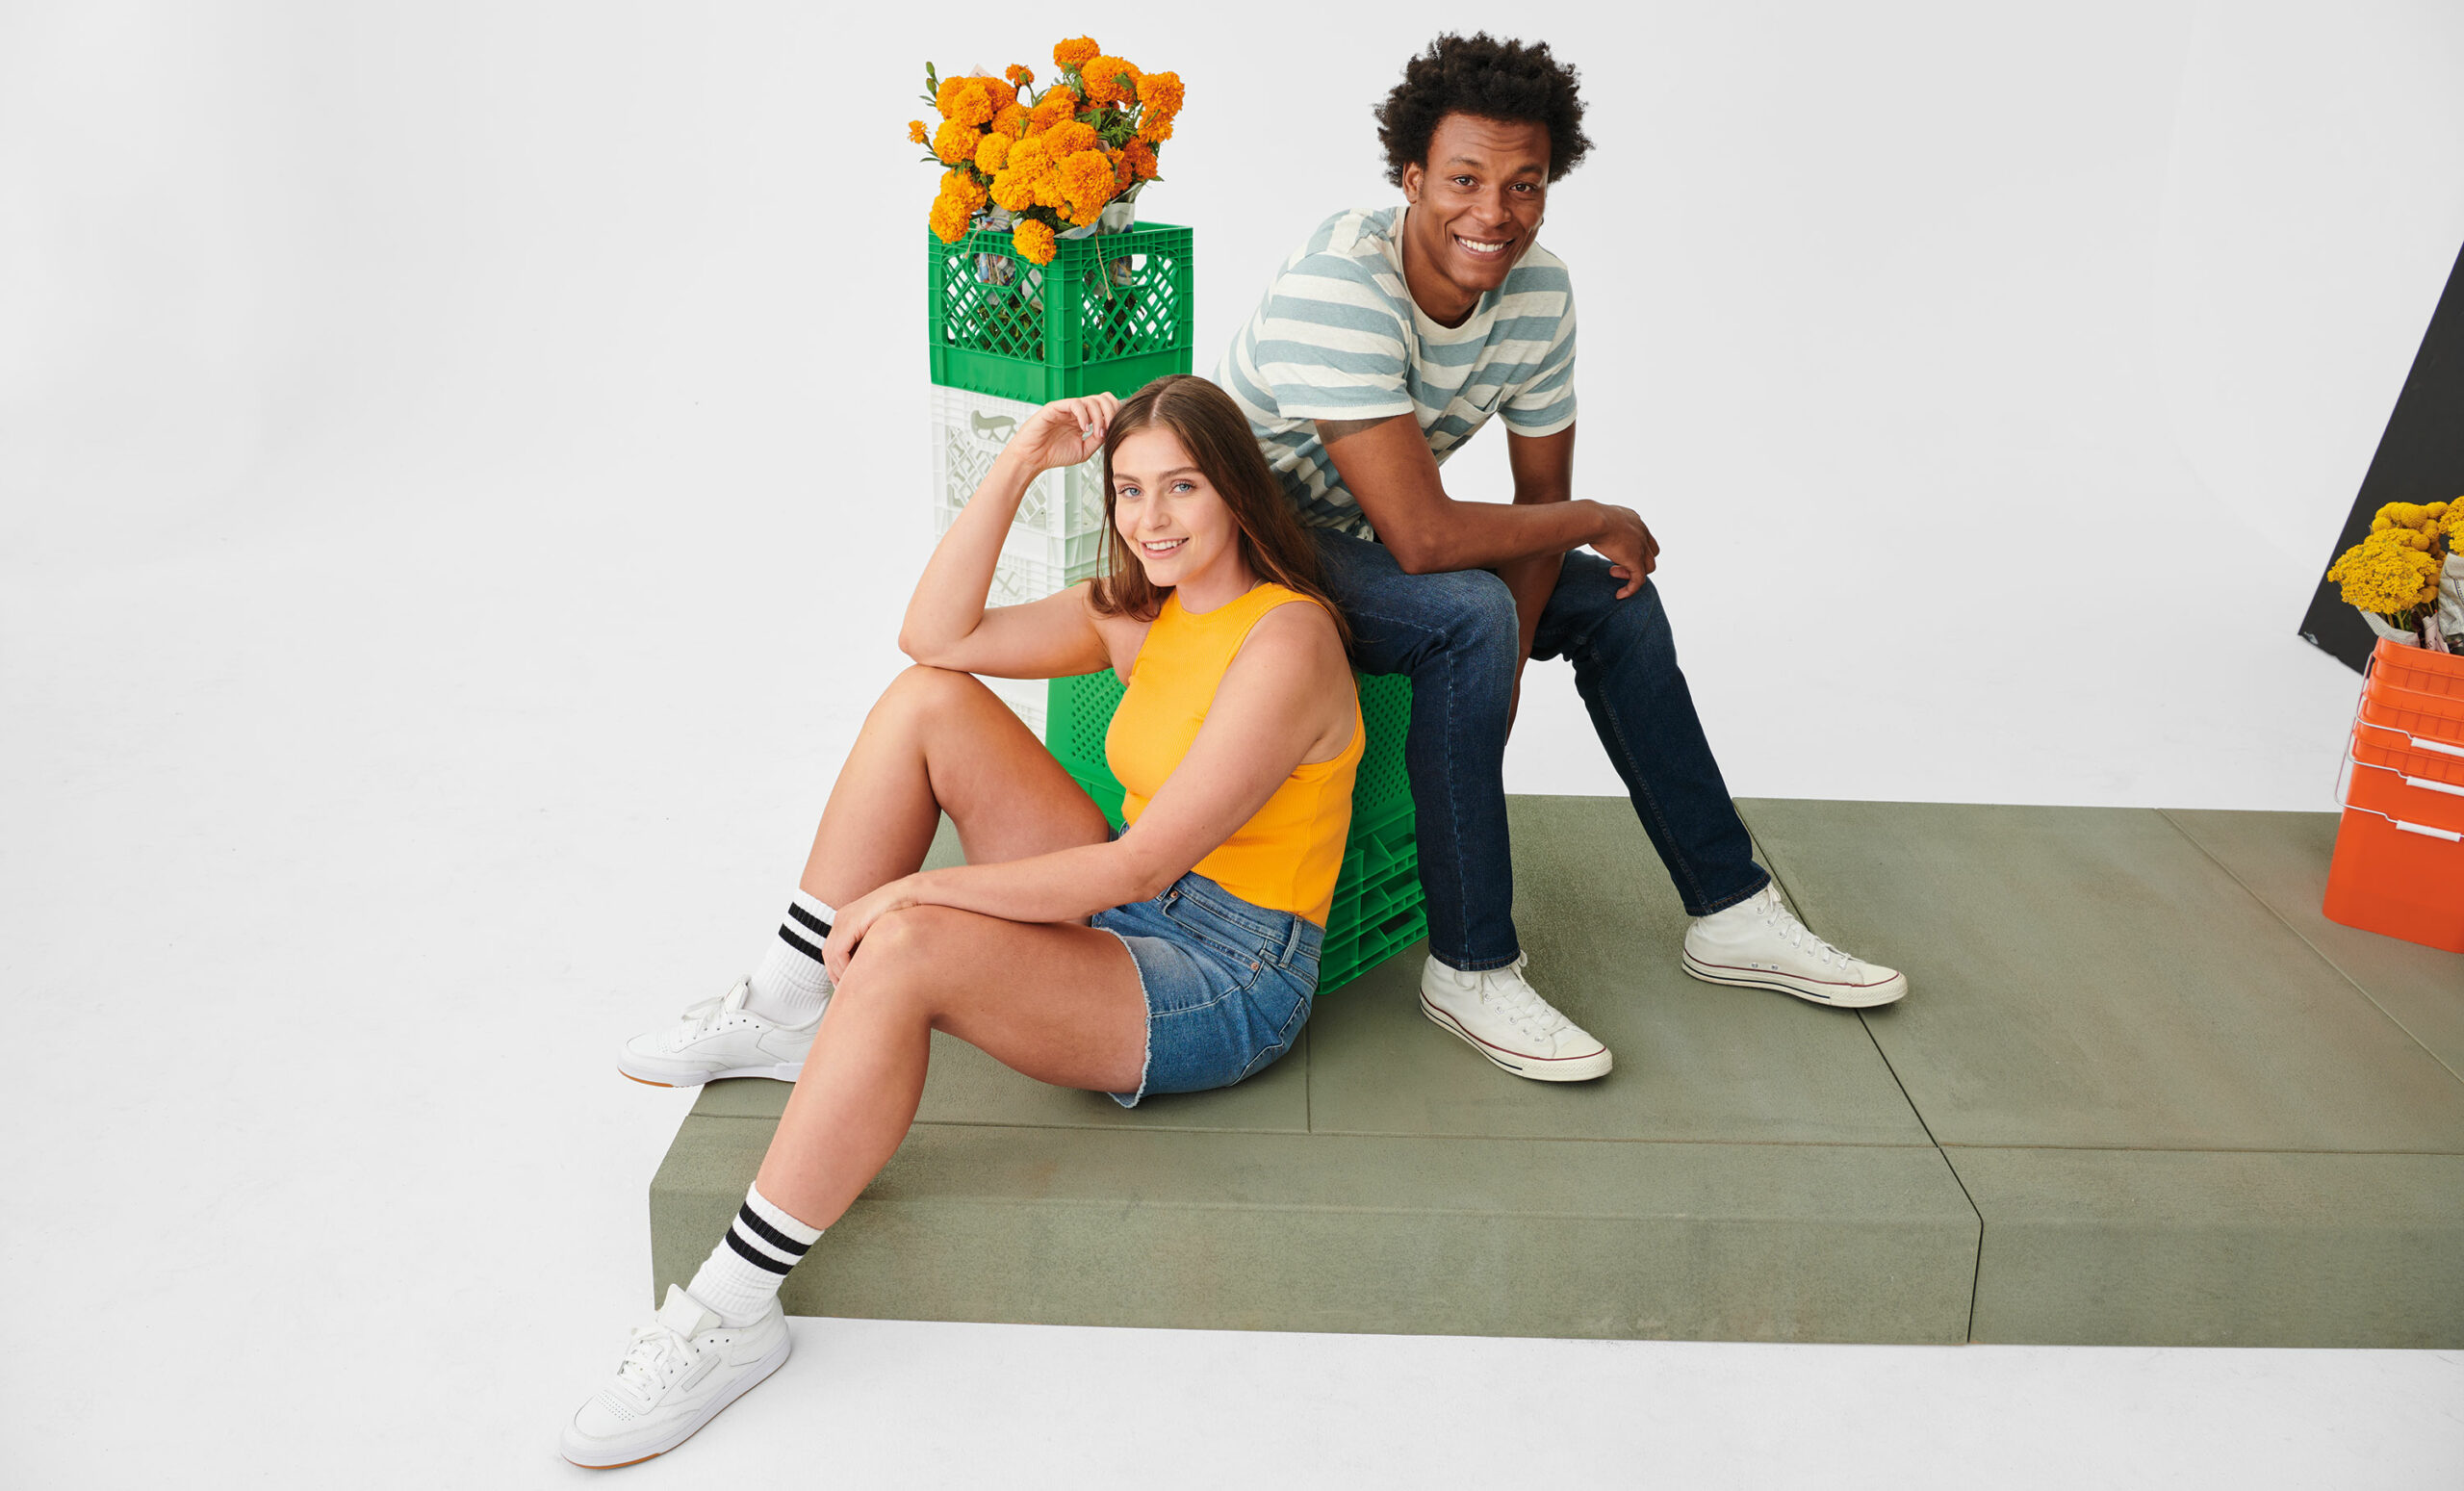 Women in Levi's® jean shorts and man in Levi's® jeans sitting down and posing in product.